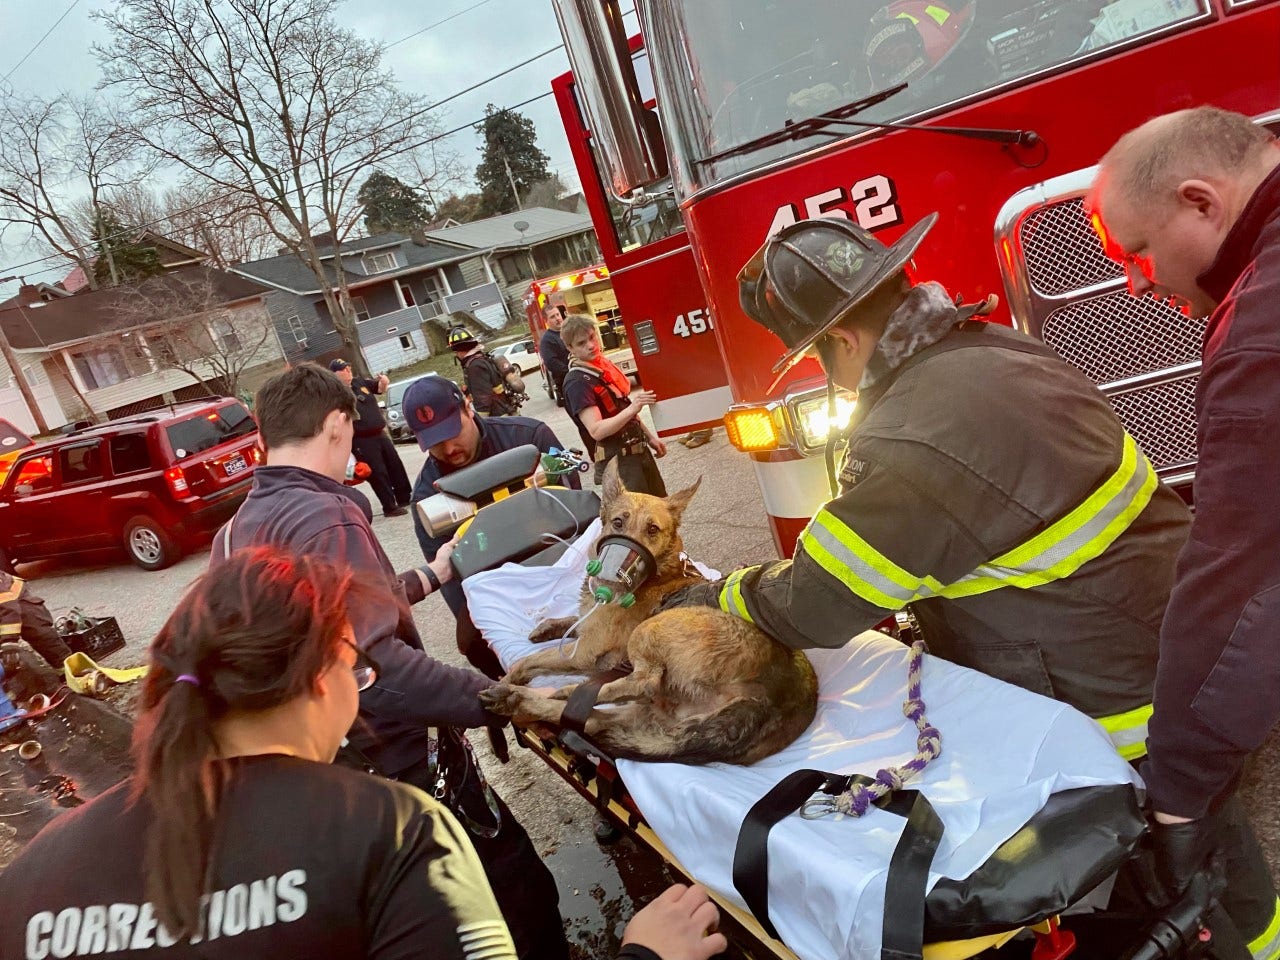 West Virginia firefighters resuscitate dog found not breathing at scene of fire